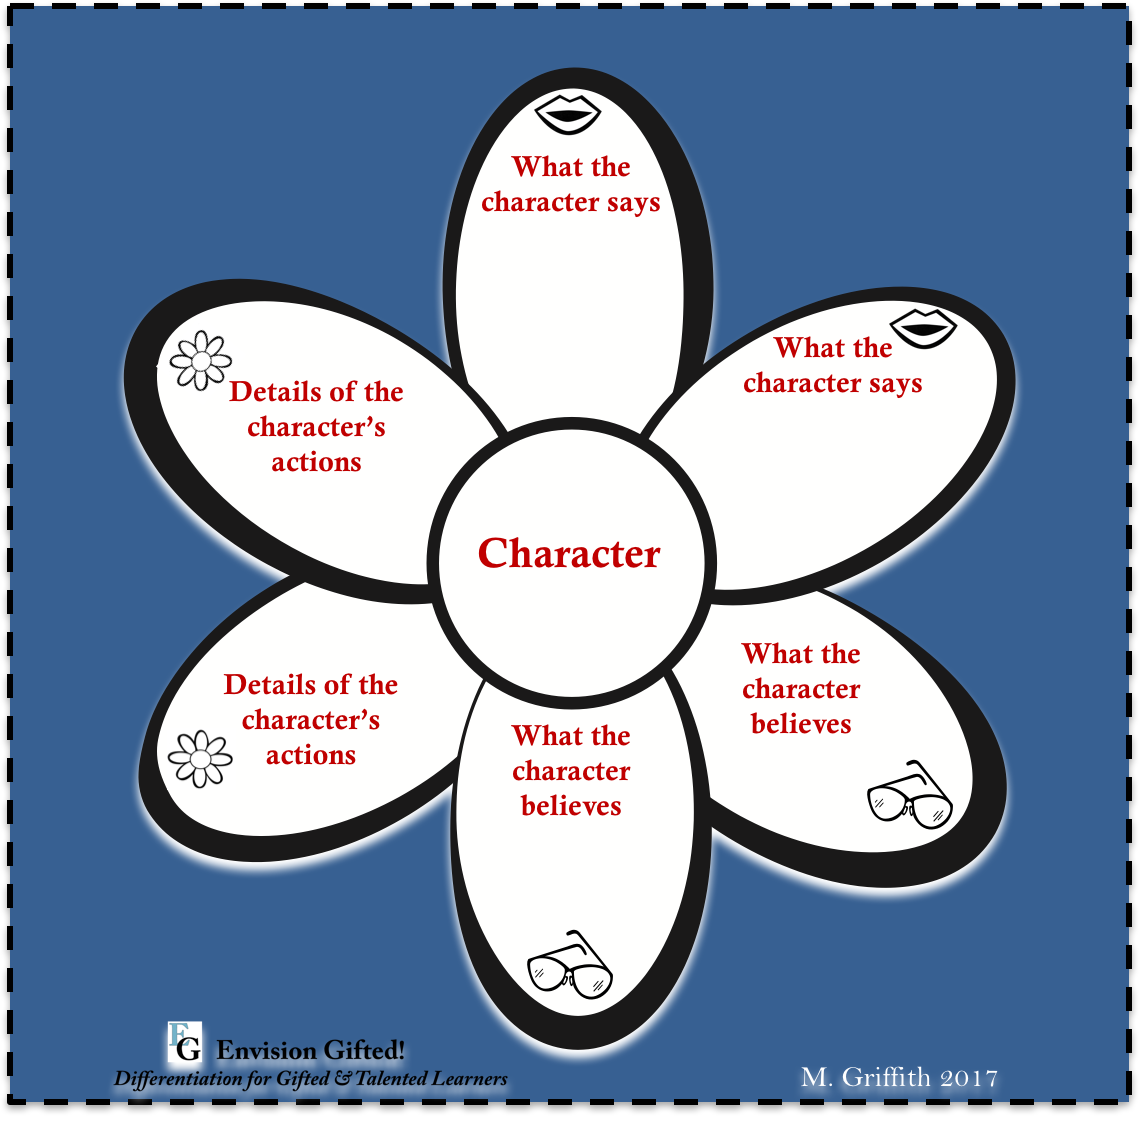 Envision Gifted. Character Analysis flower